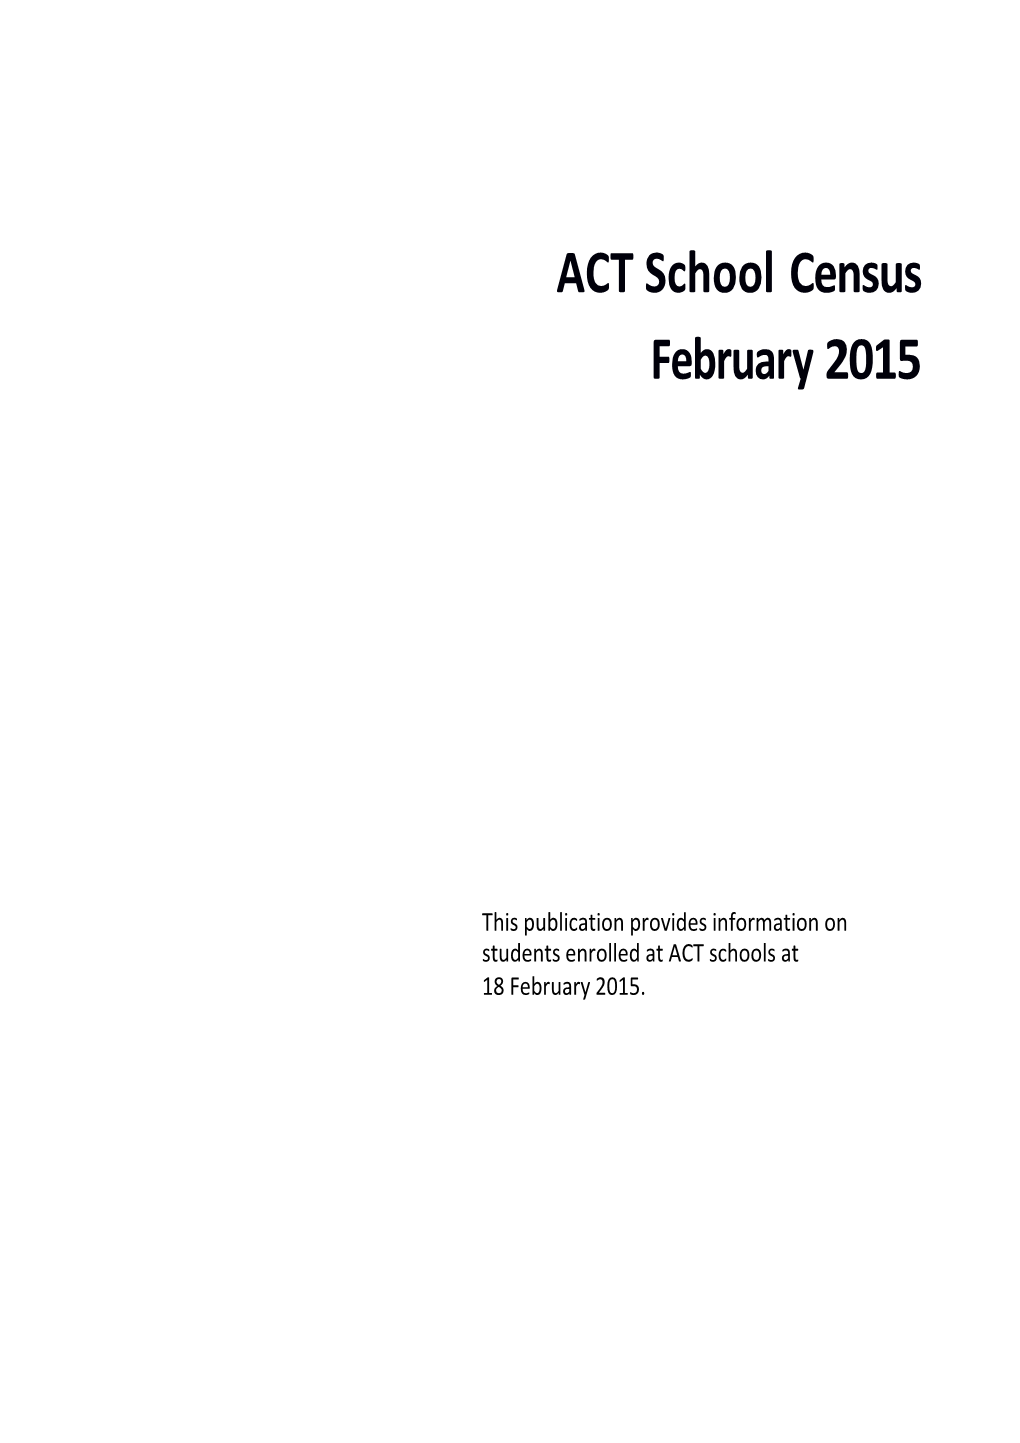 This Publication Provides Information on Students Enrolled at ACT Schools At